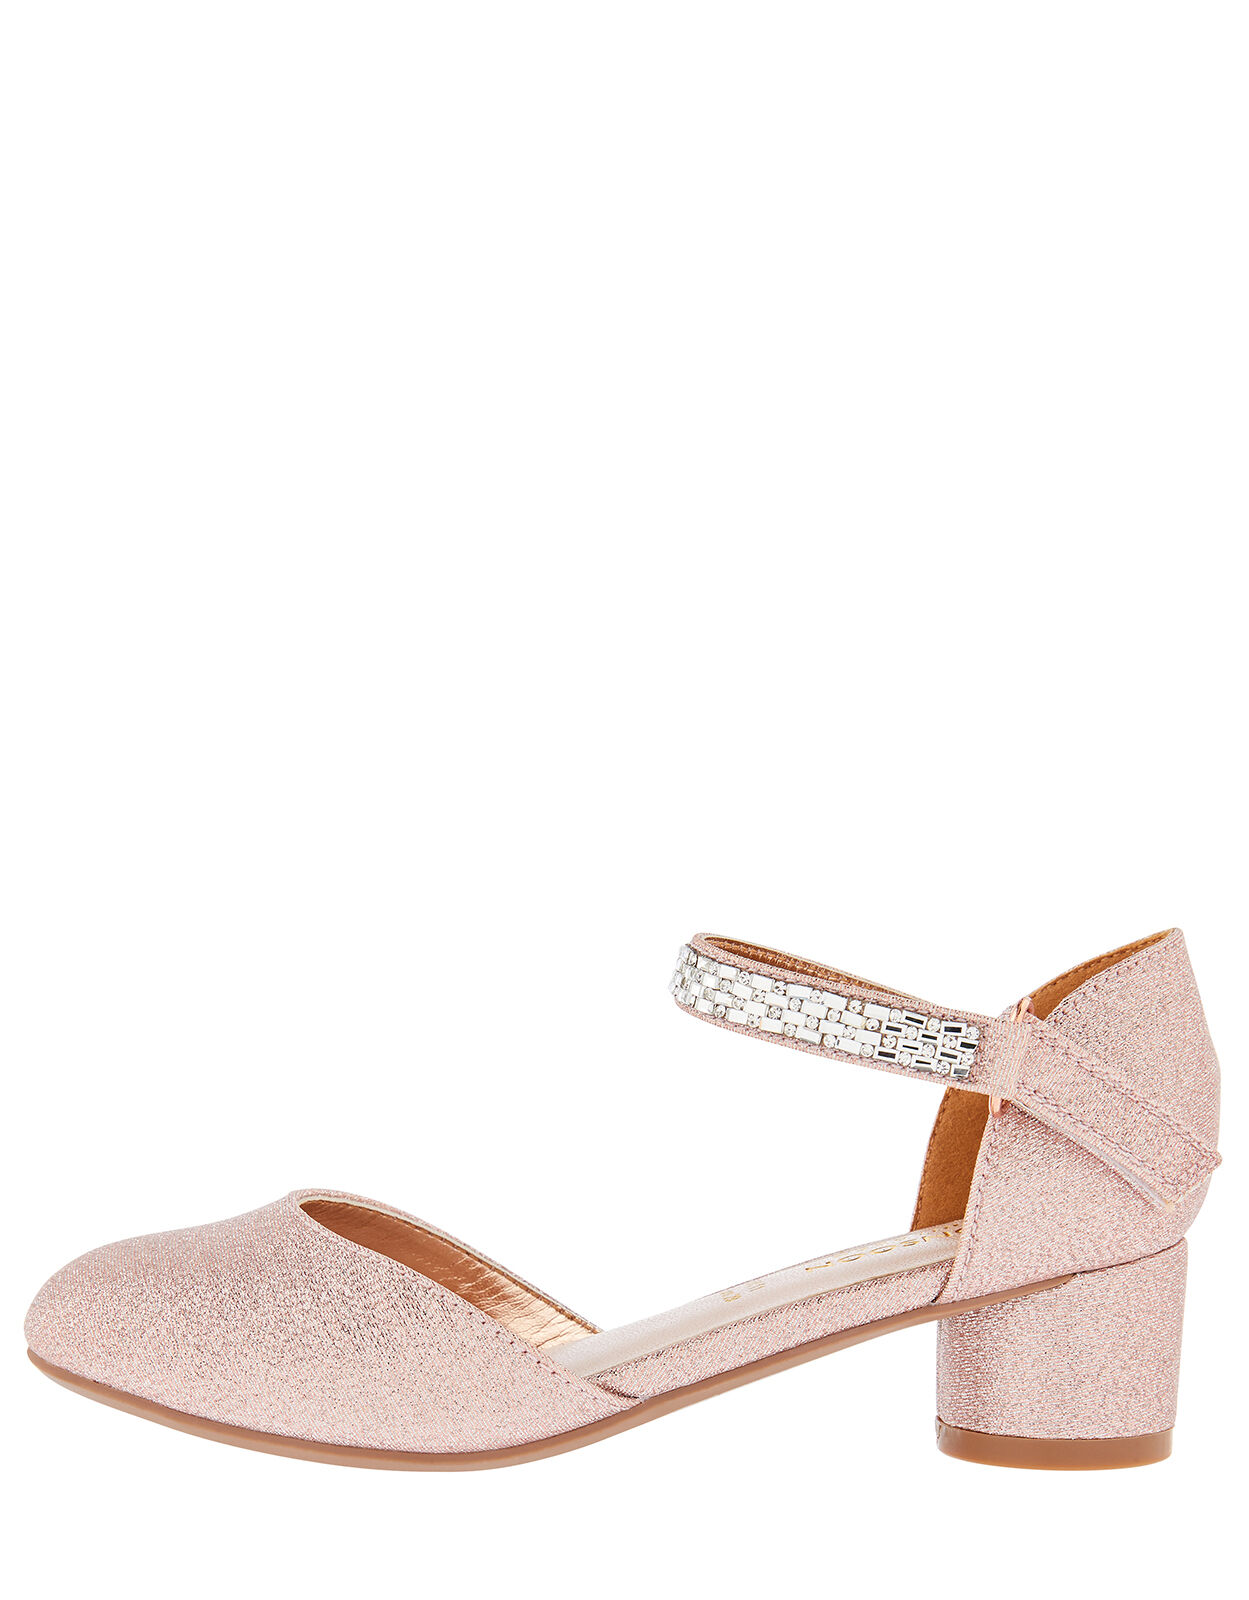 rose gold strap shoes